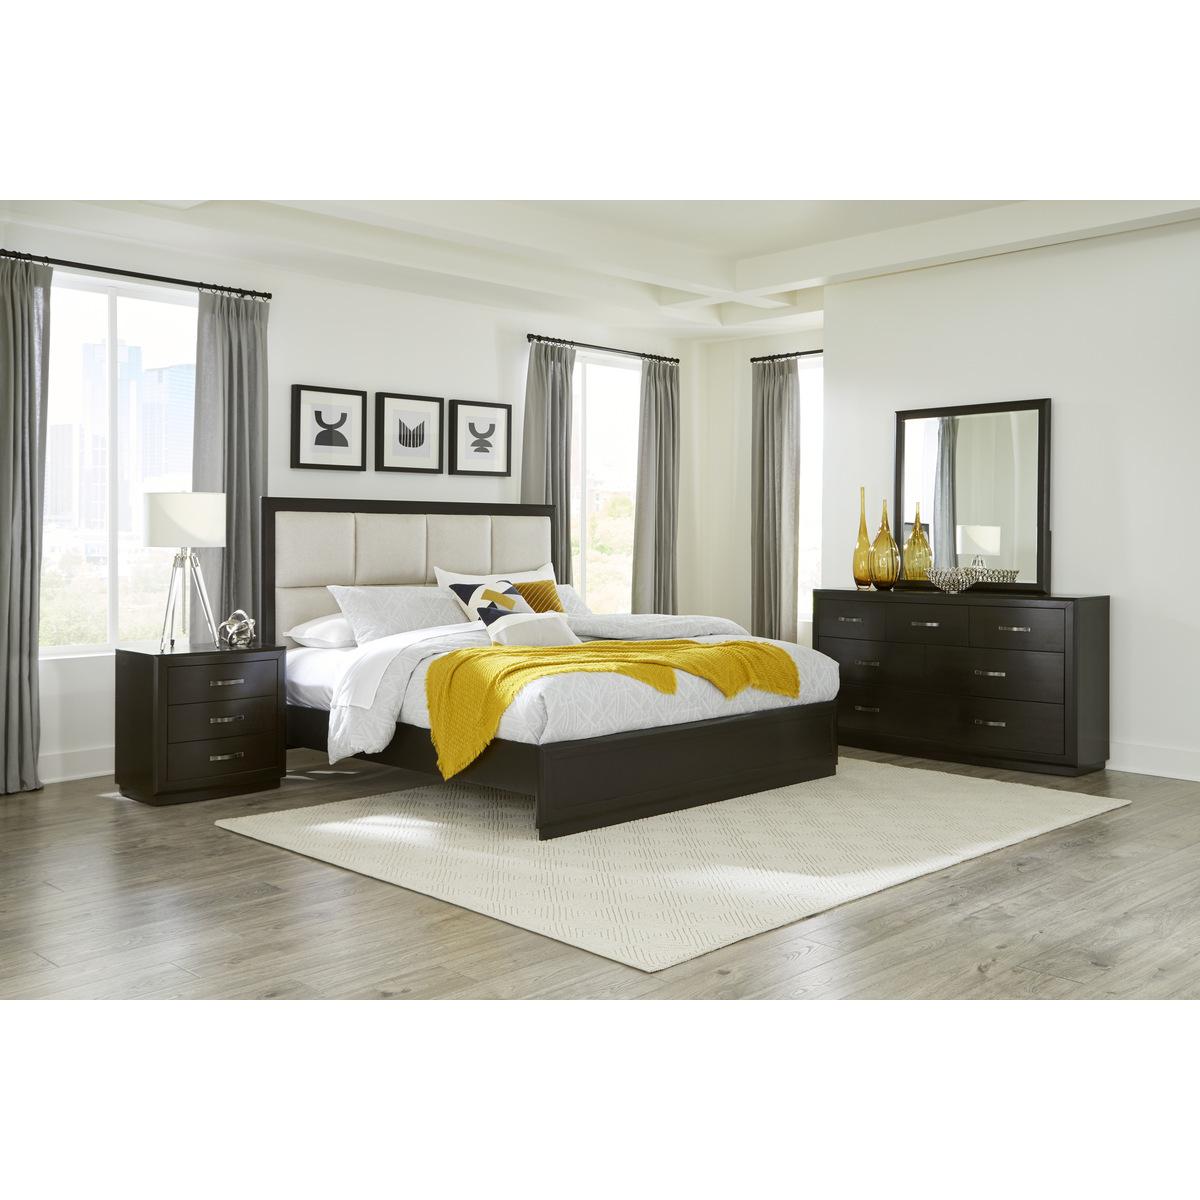 Transitional Bedroom Set 1575-1*3PC Hodgin 1575-1*3PC in Charcoal, Beige 